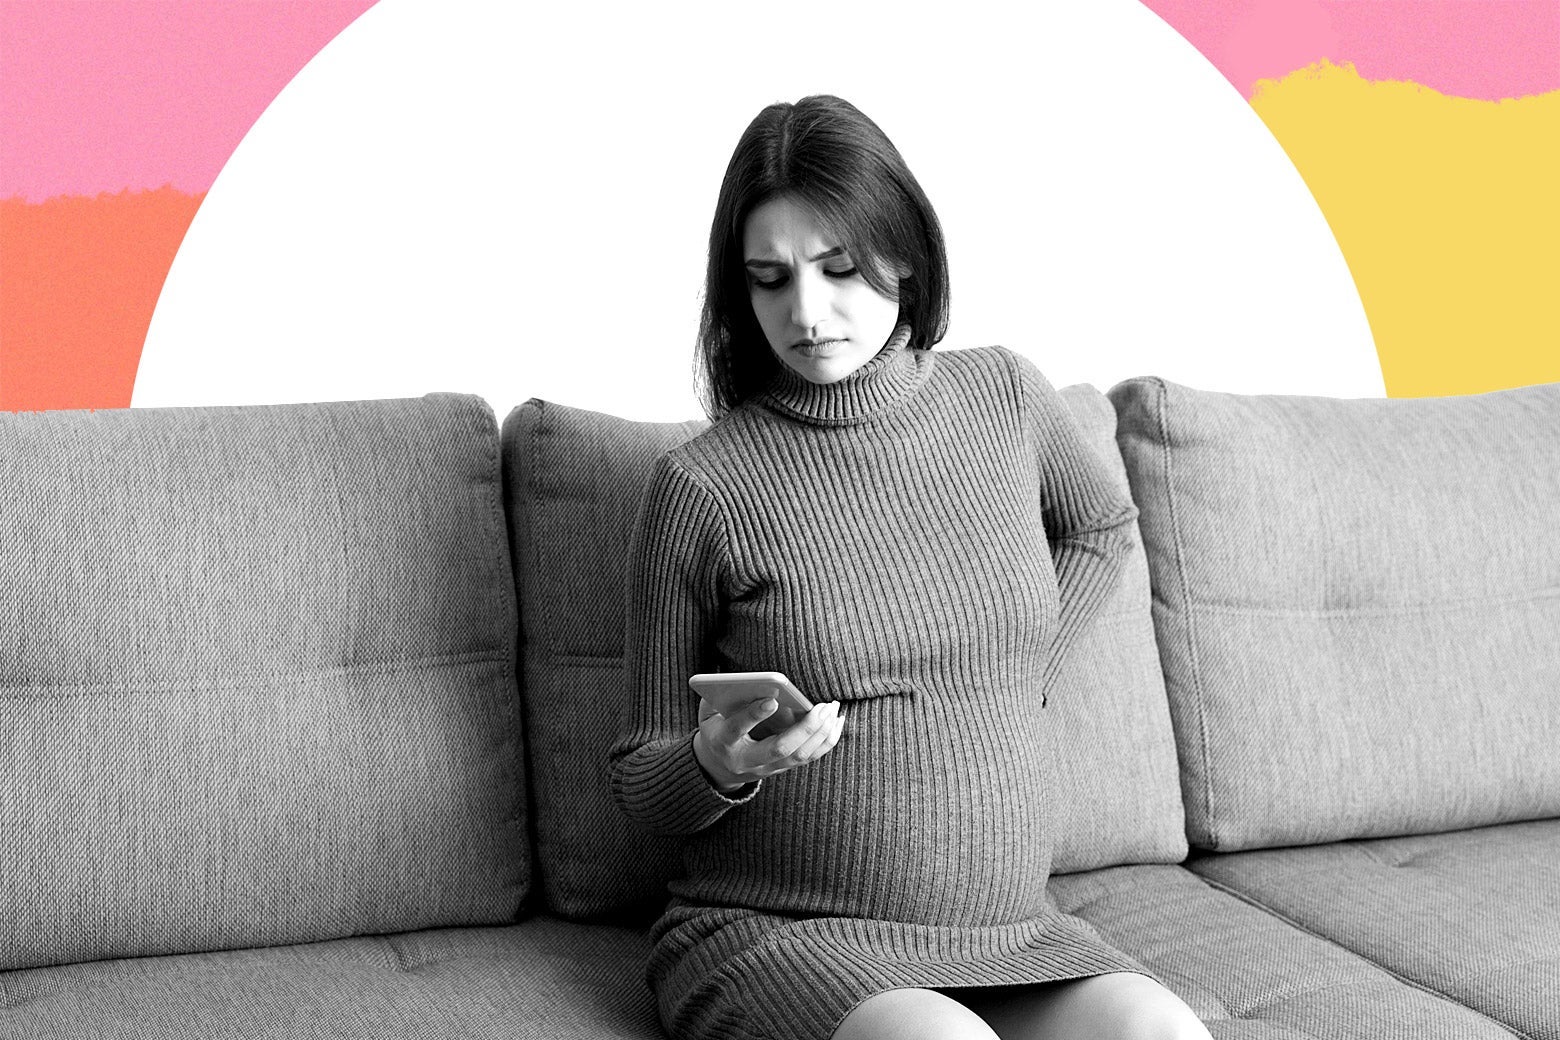 A pregnant woman looks annoyed at her phone.